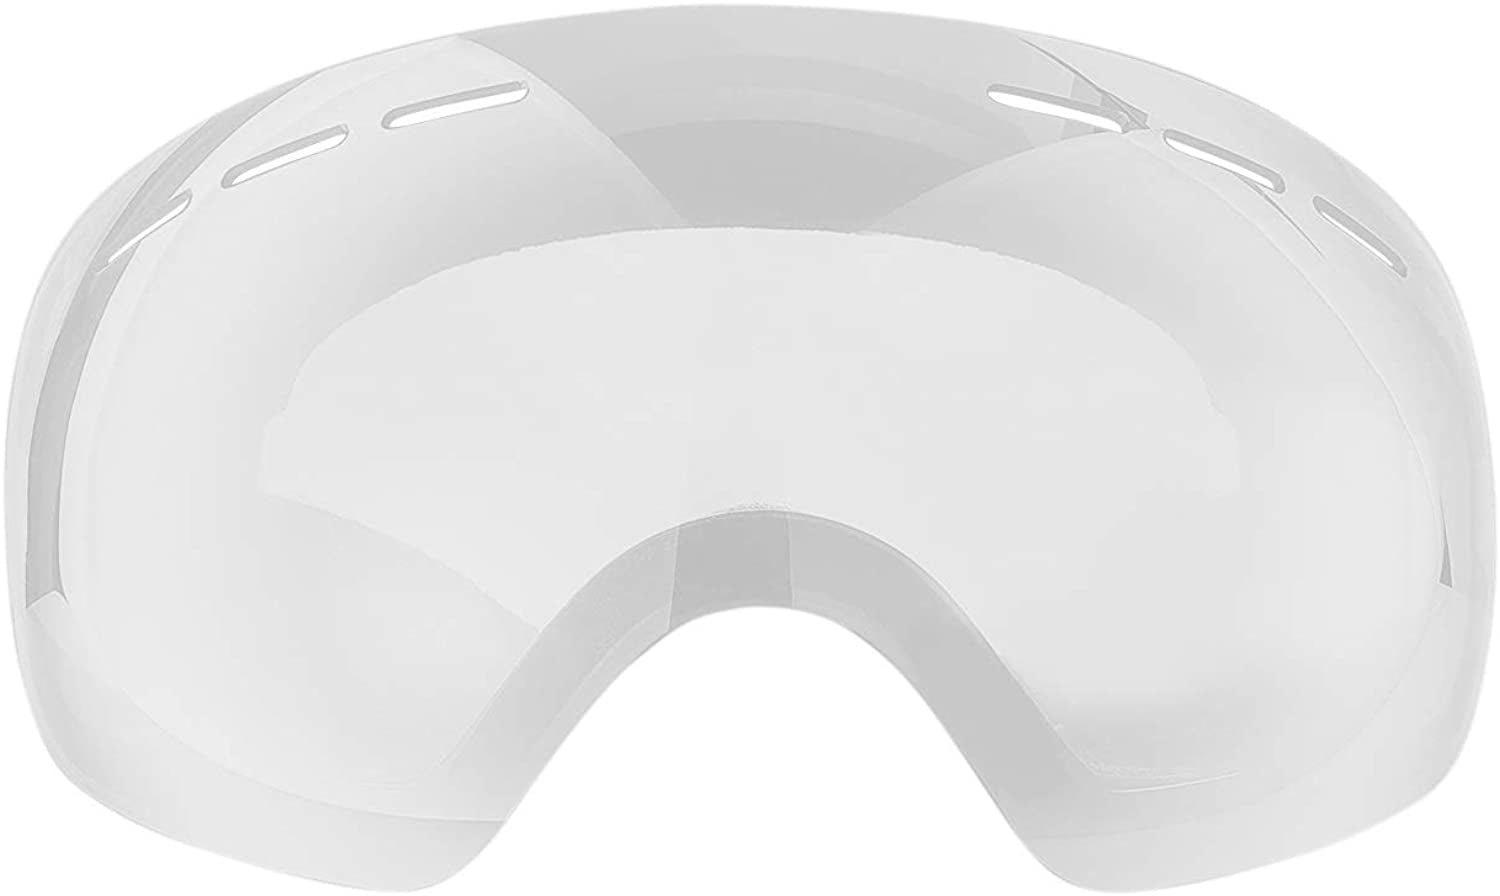 Anti-Wind Mira Red Lens UV400 Protection Anti-Fog Ski Goggle Replacement Lens